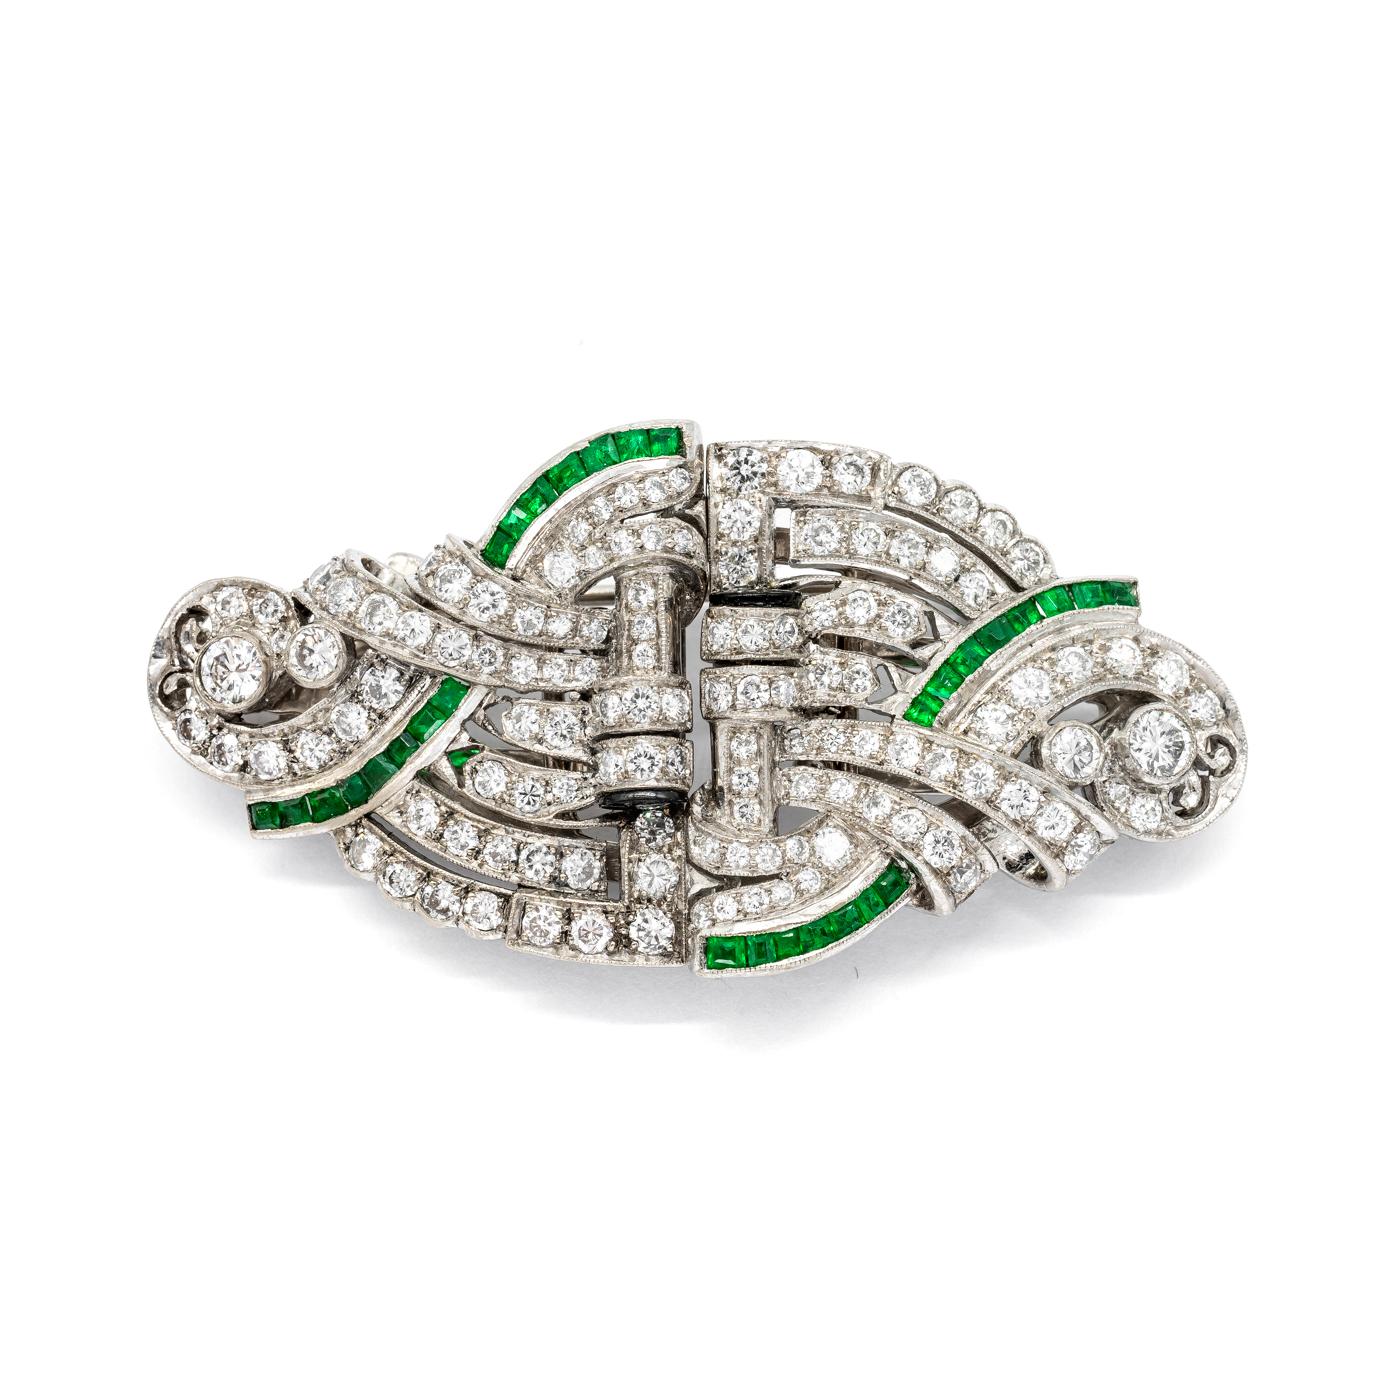 An Art Deco emerald and diamond double clip brooch, set with round brilliant-cut diamonds, weighing an estimated 2.60ct, and calibre cut emeralds, with black onyx finials, mounted in platinum with an 18ct white gold removable brooch fitting.